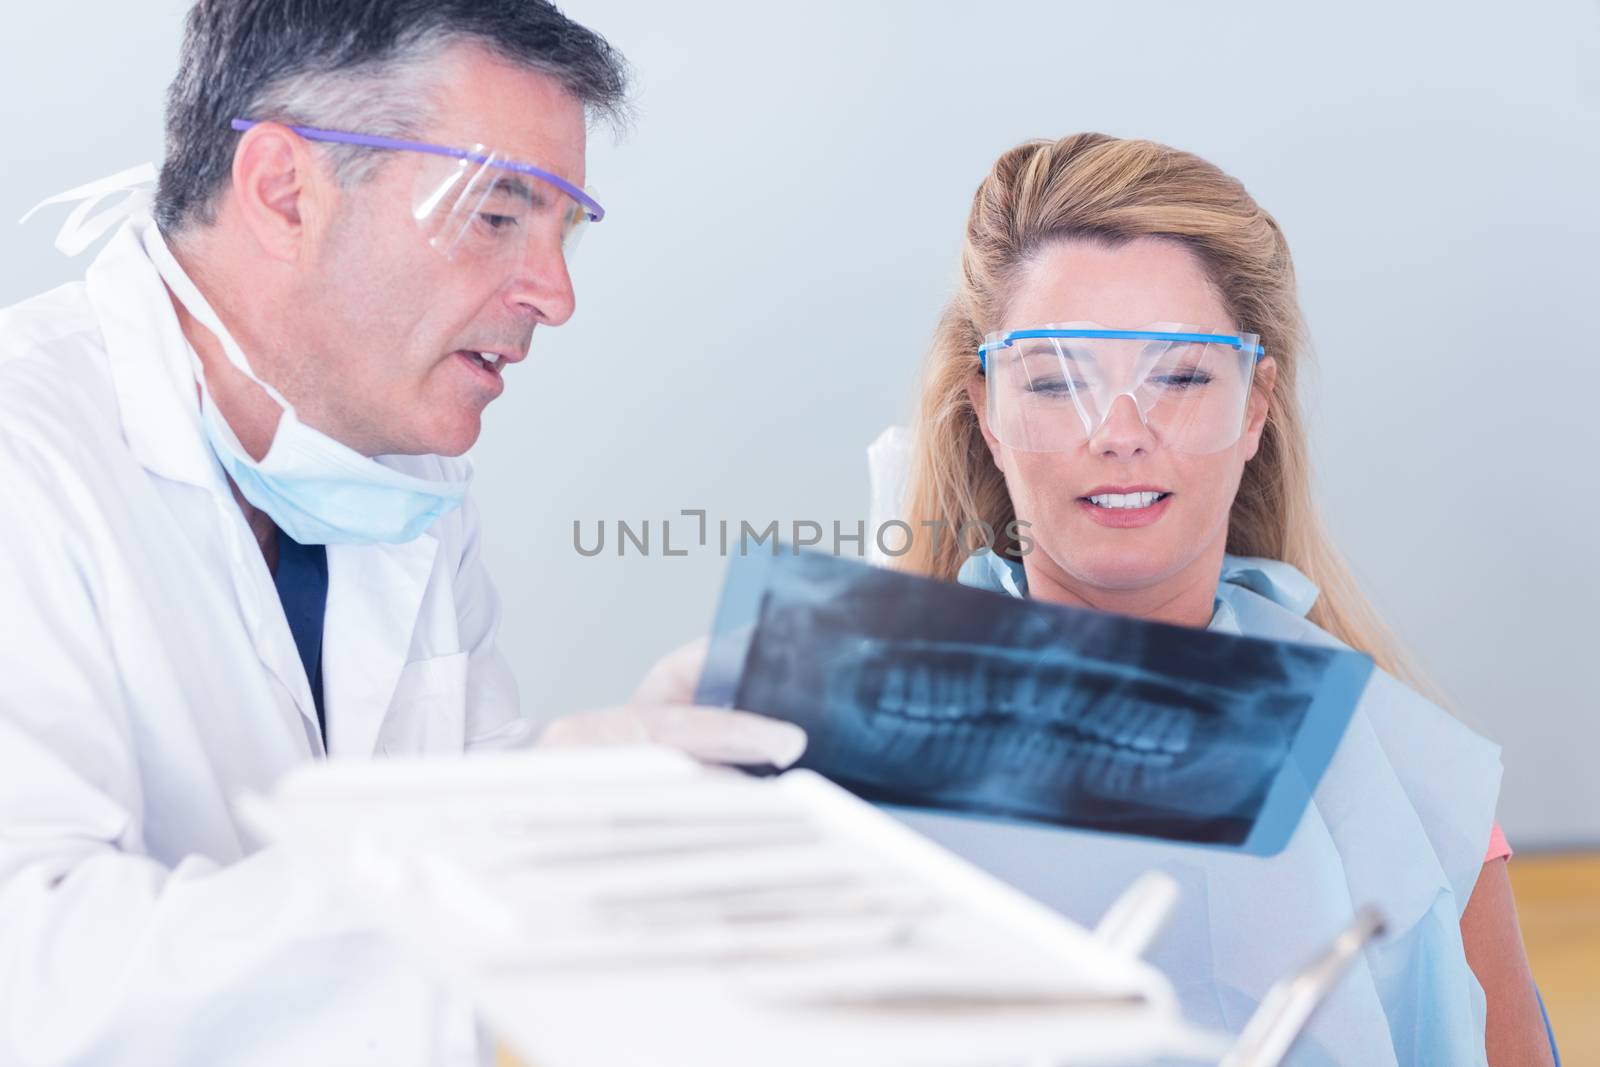 Dentist showing x-ray to his patient by Wavebreakmedia